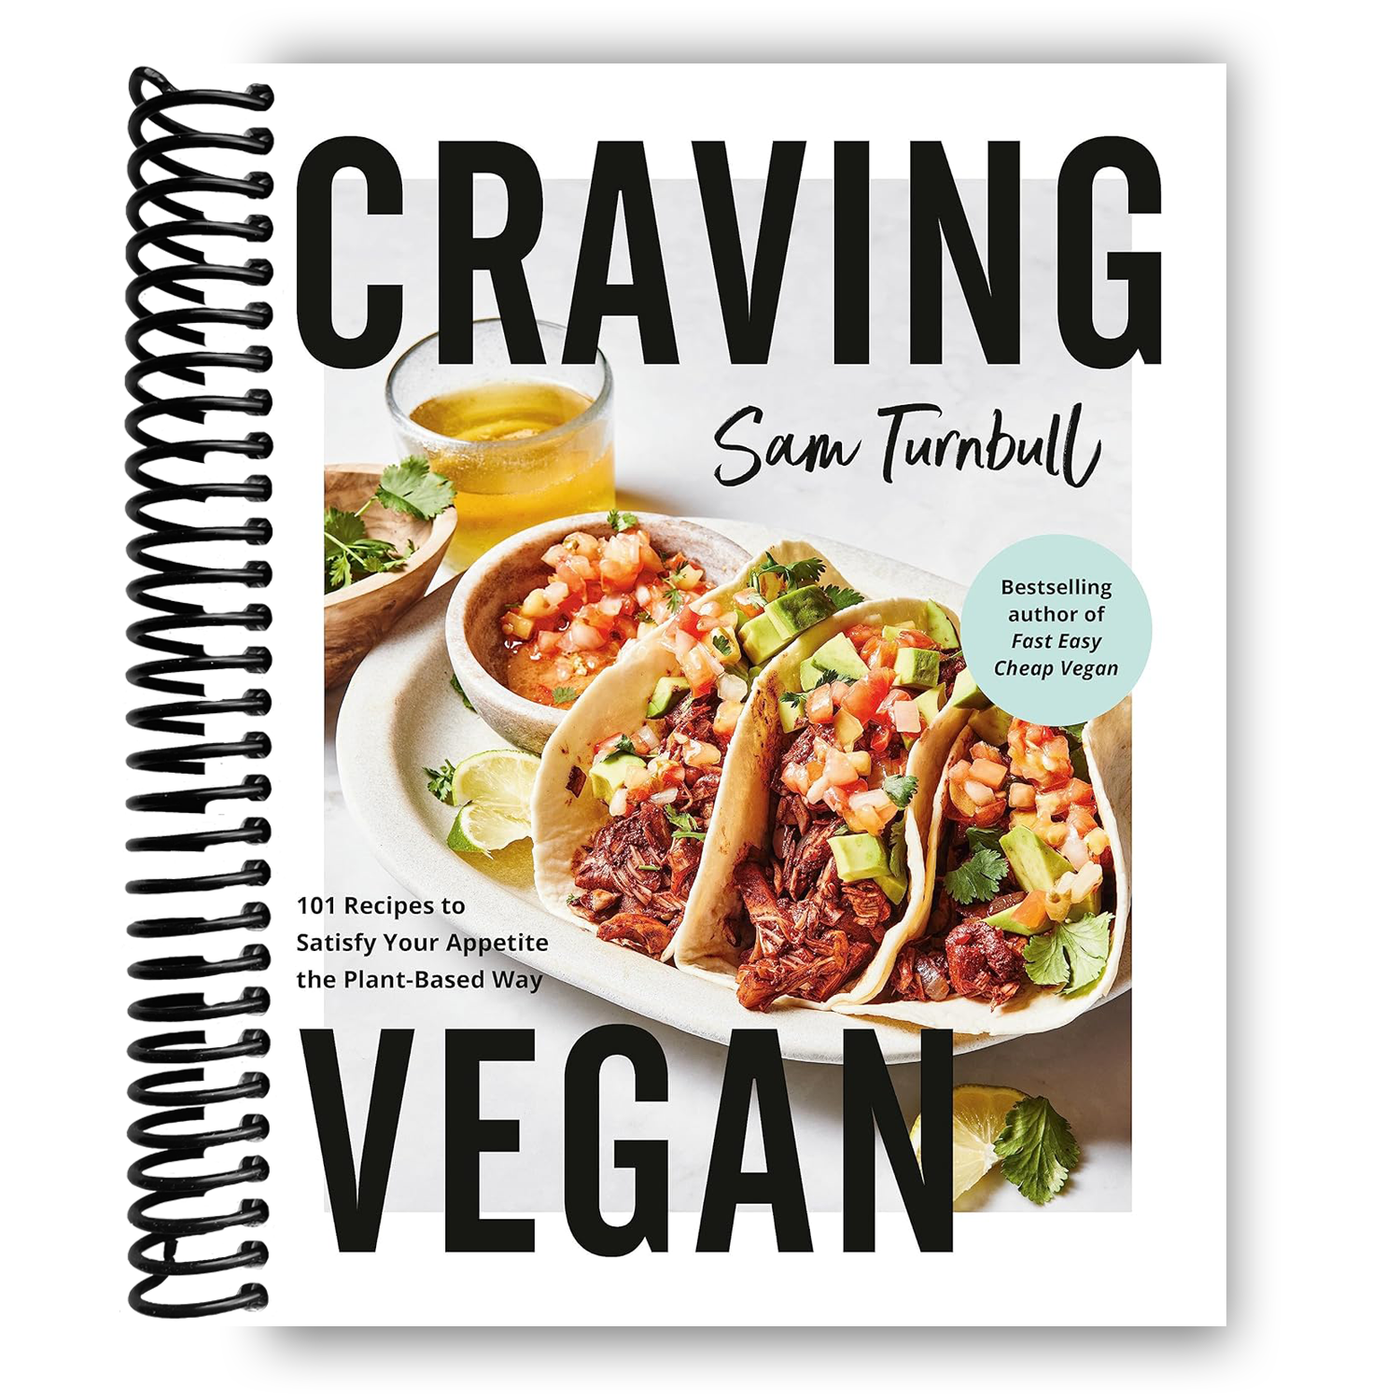 Craving Vegan: 101 Recipes to Satisfy Your Appetite the Plant-Based Way (Spiral Bound)